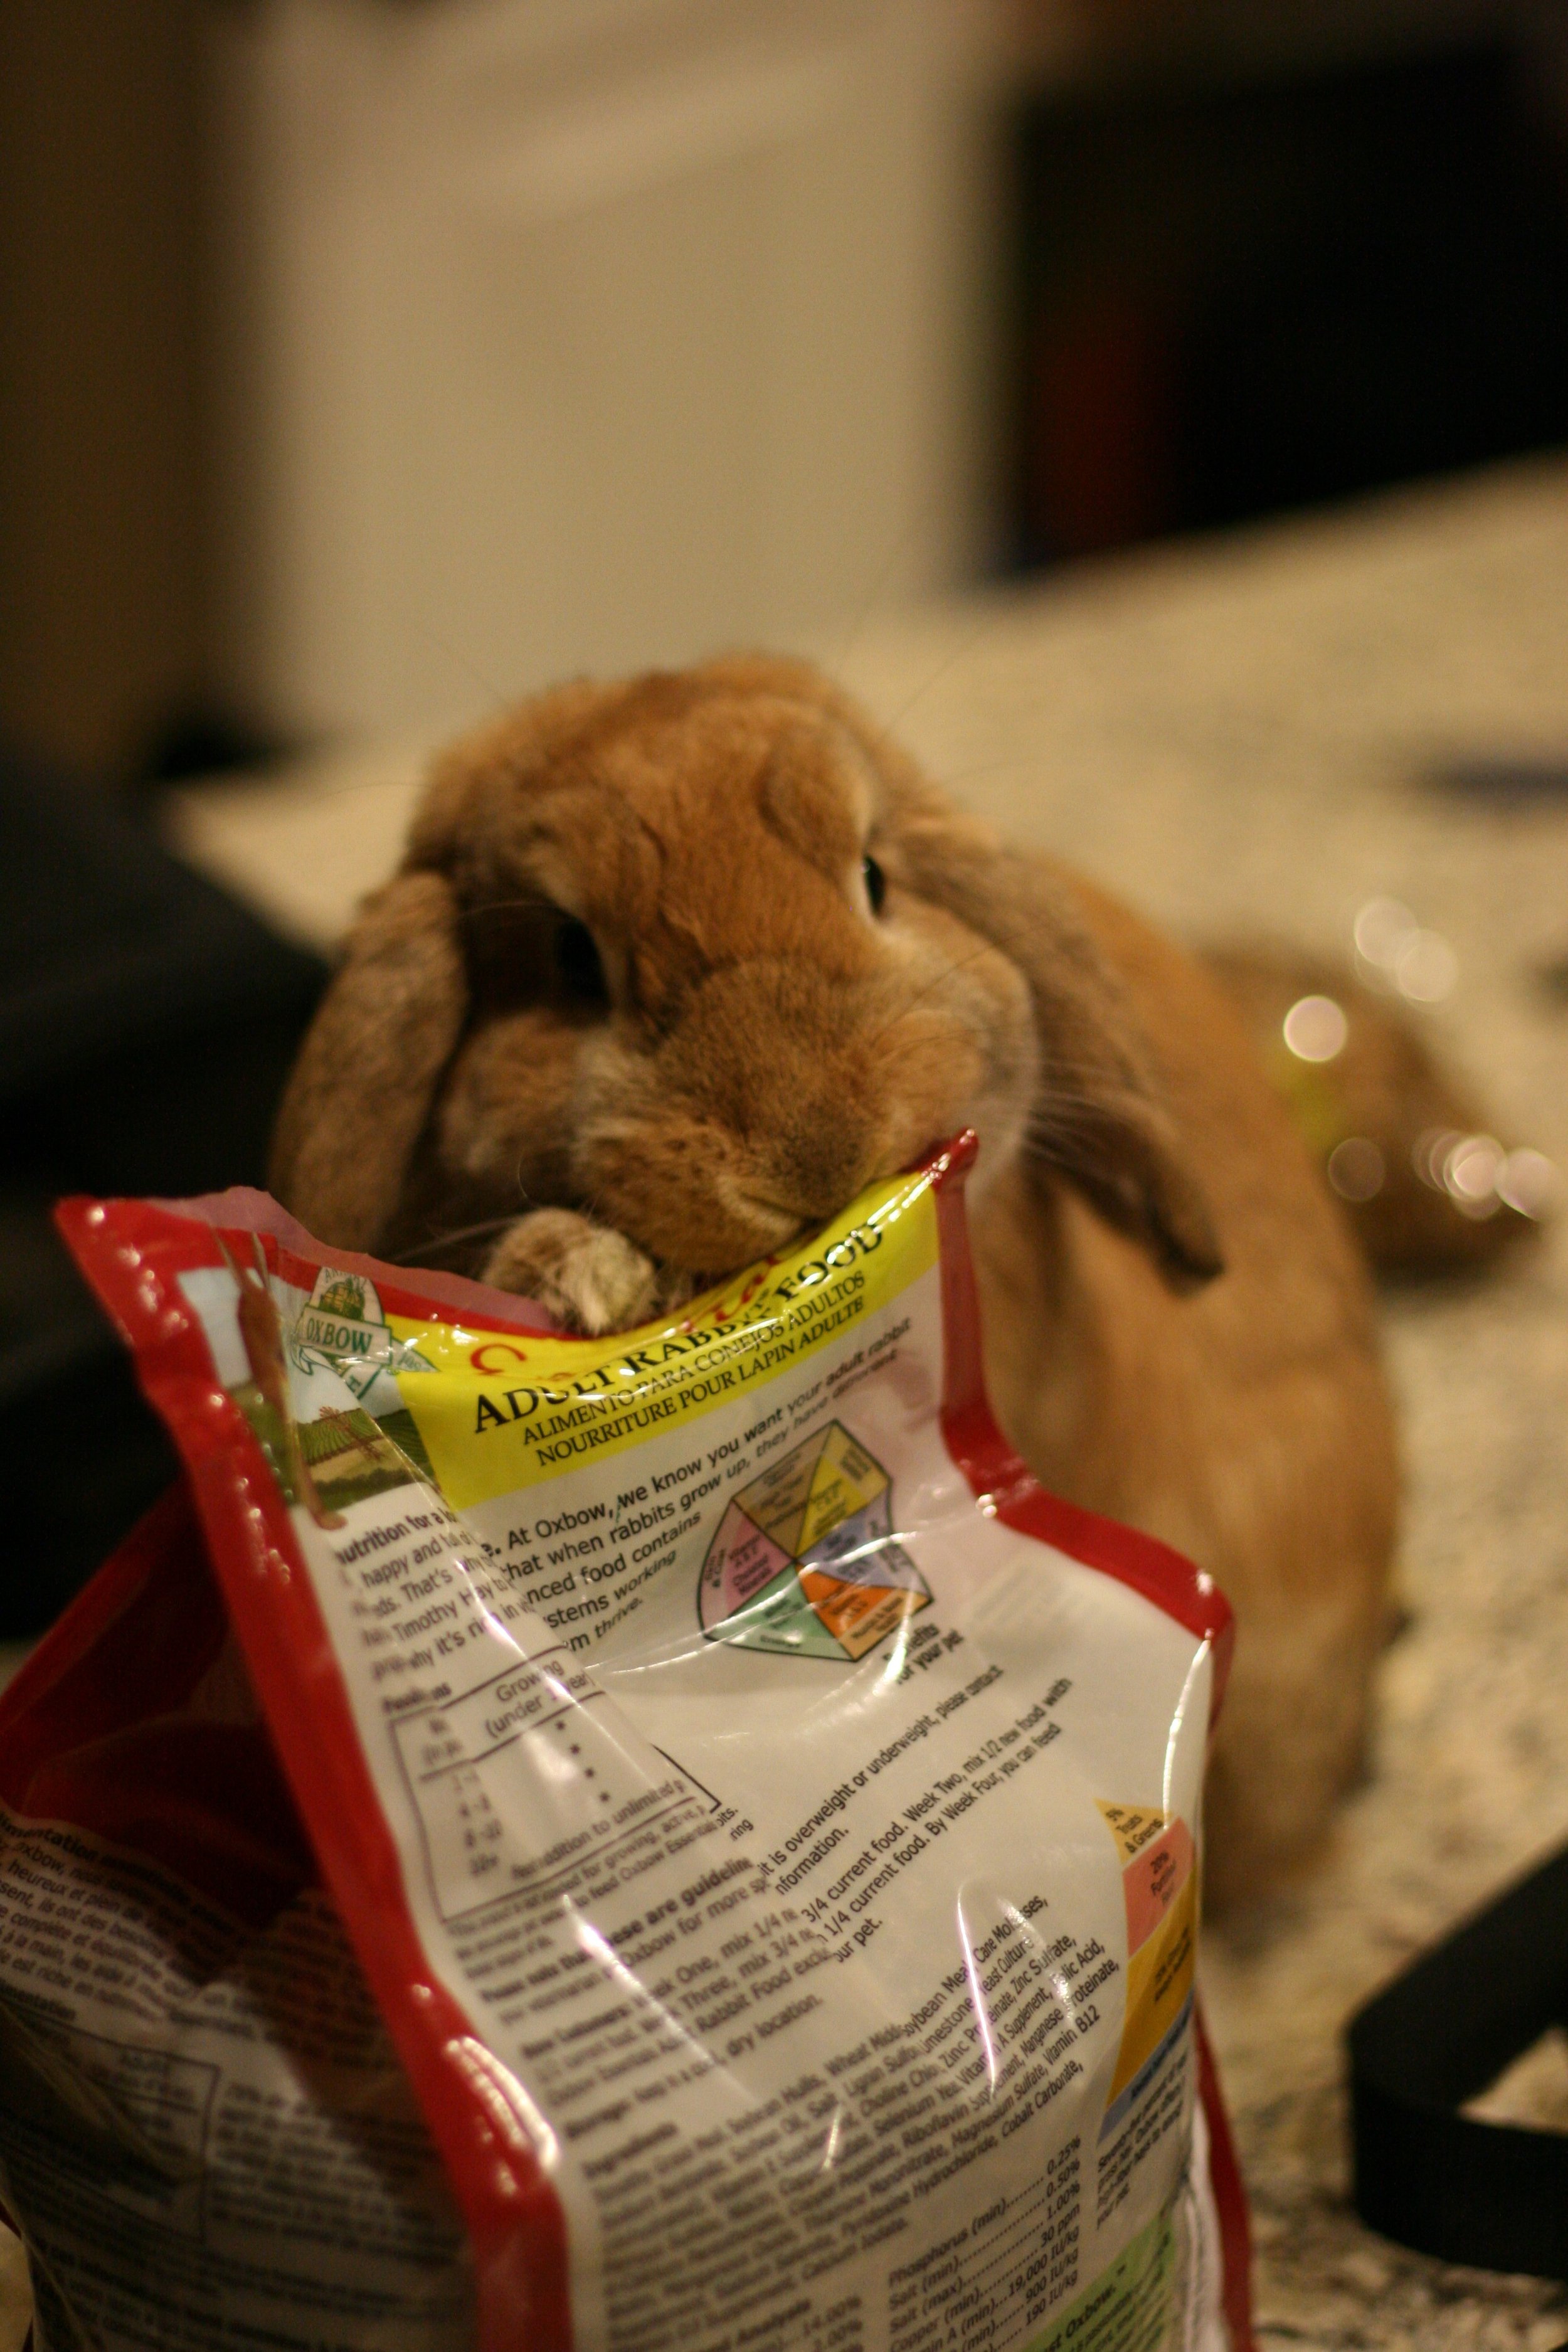 Human Is Too Slow in Getting Bunny's Pellets - Bunny Will Just Get Them Himself